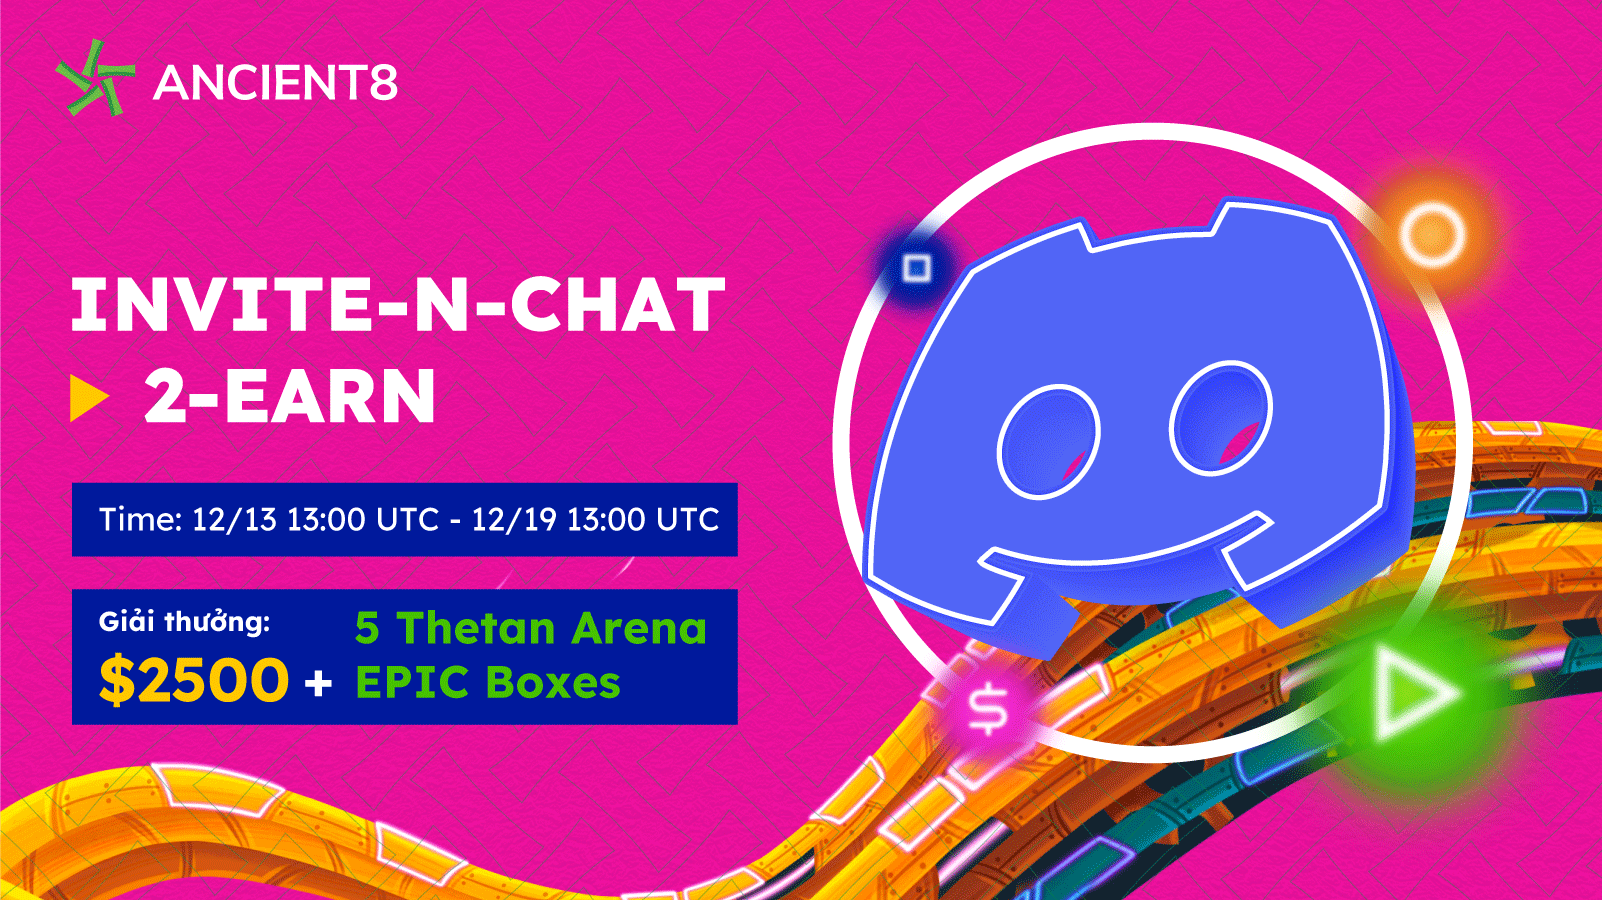 Invite-n-chat-2-earn Event